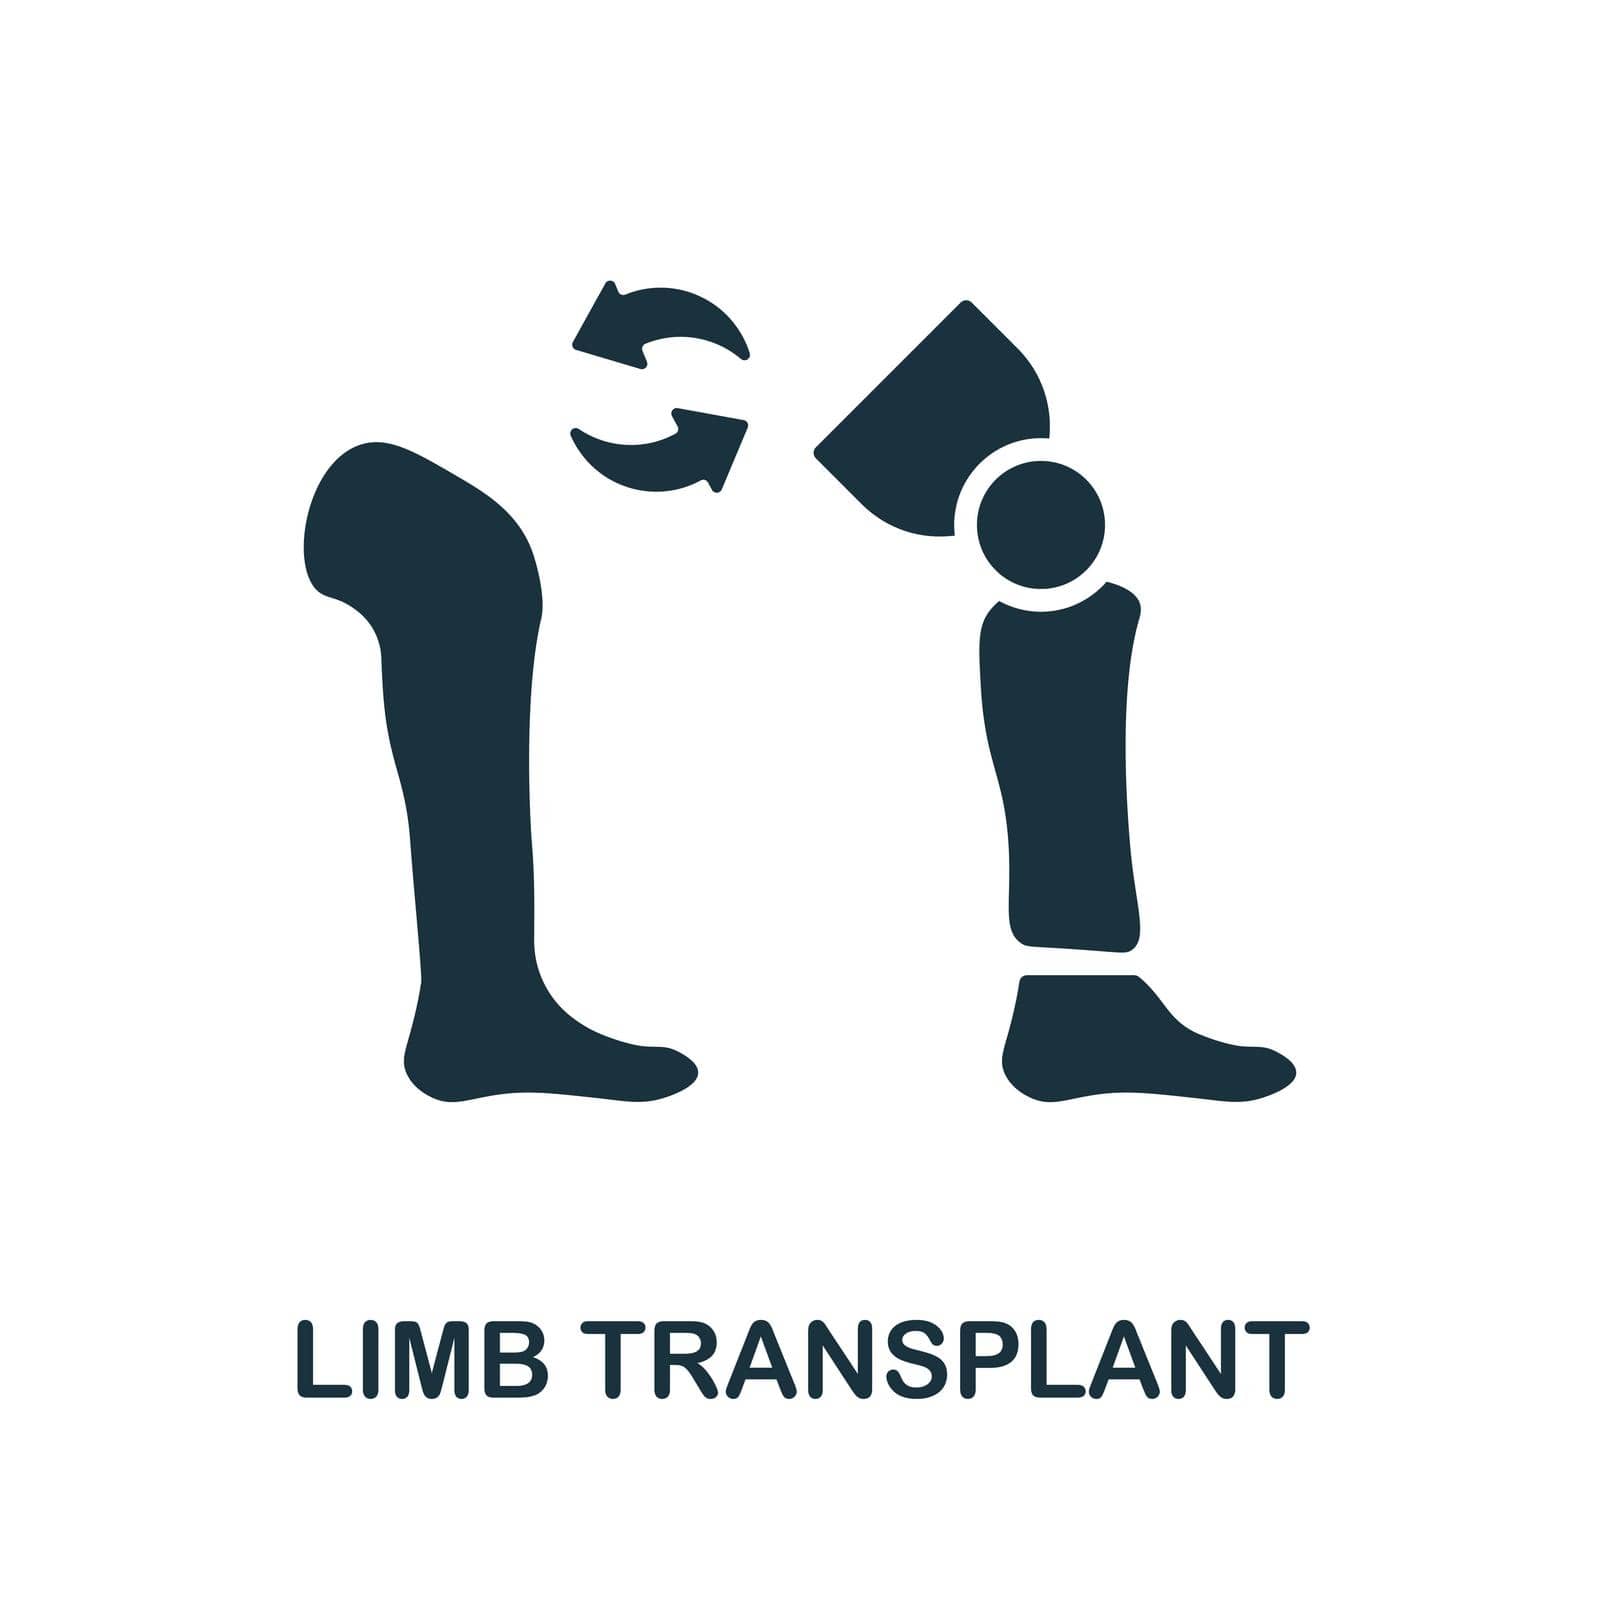 Limb Transplant flat icon. Simple colors elements from transplantation collection. Flat Limb Transplant icon for graphics, wed design and more.